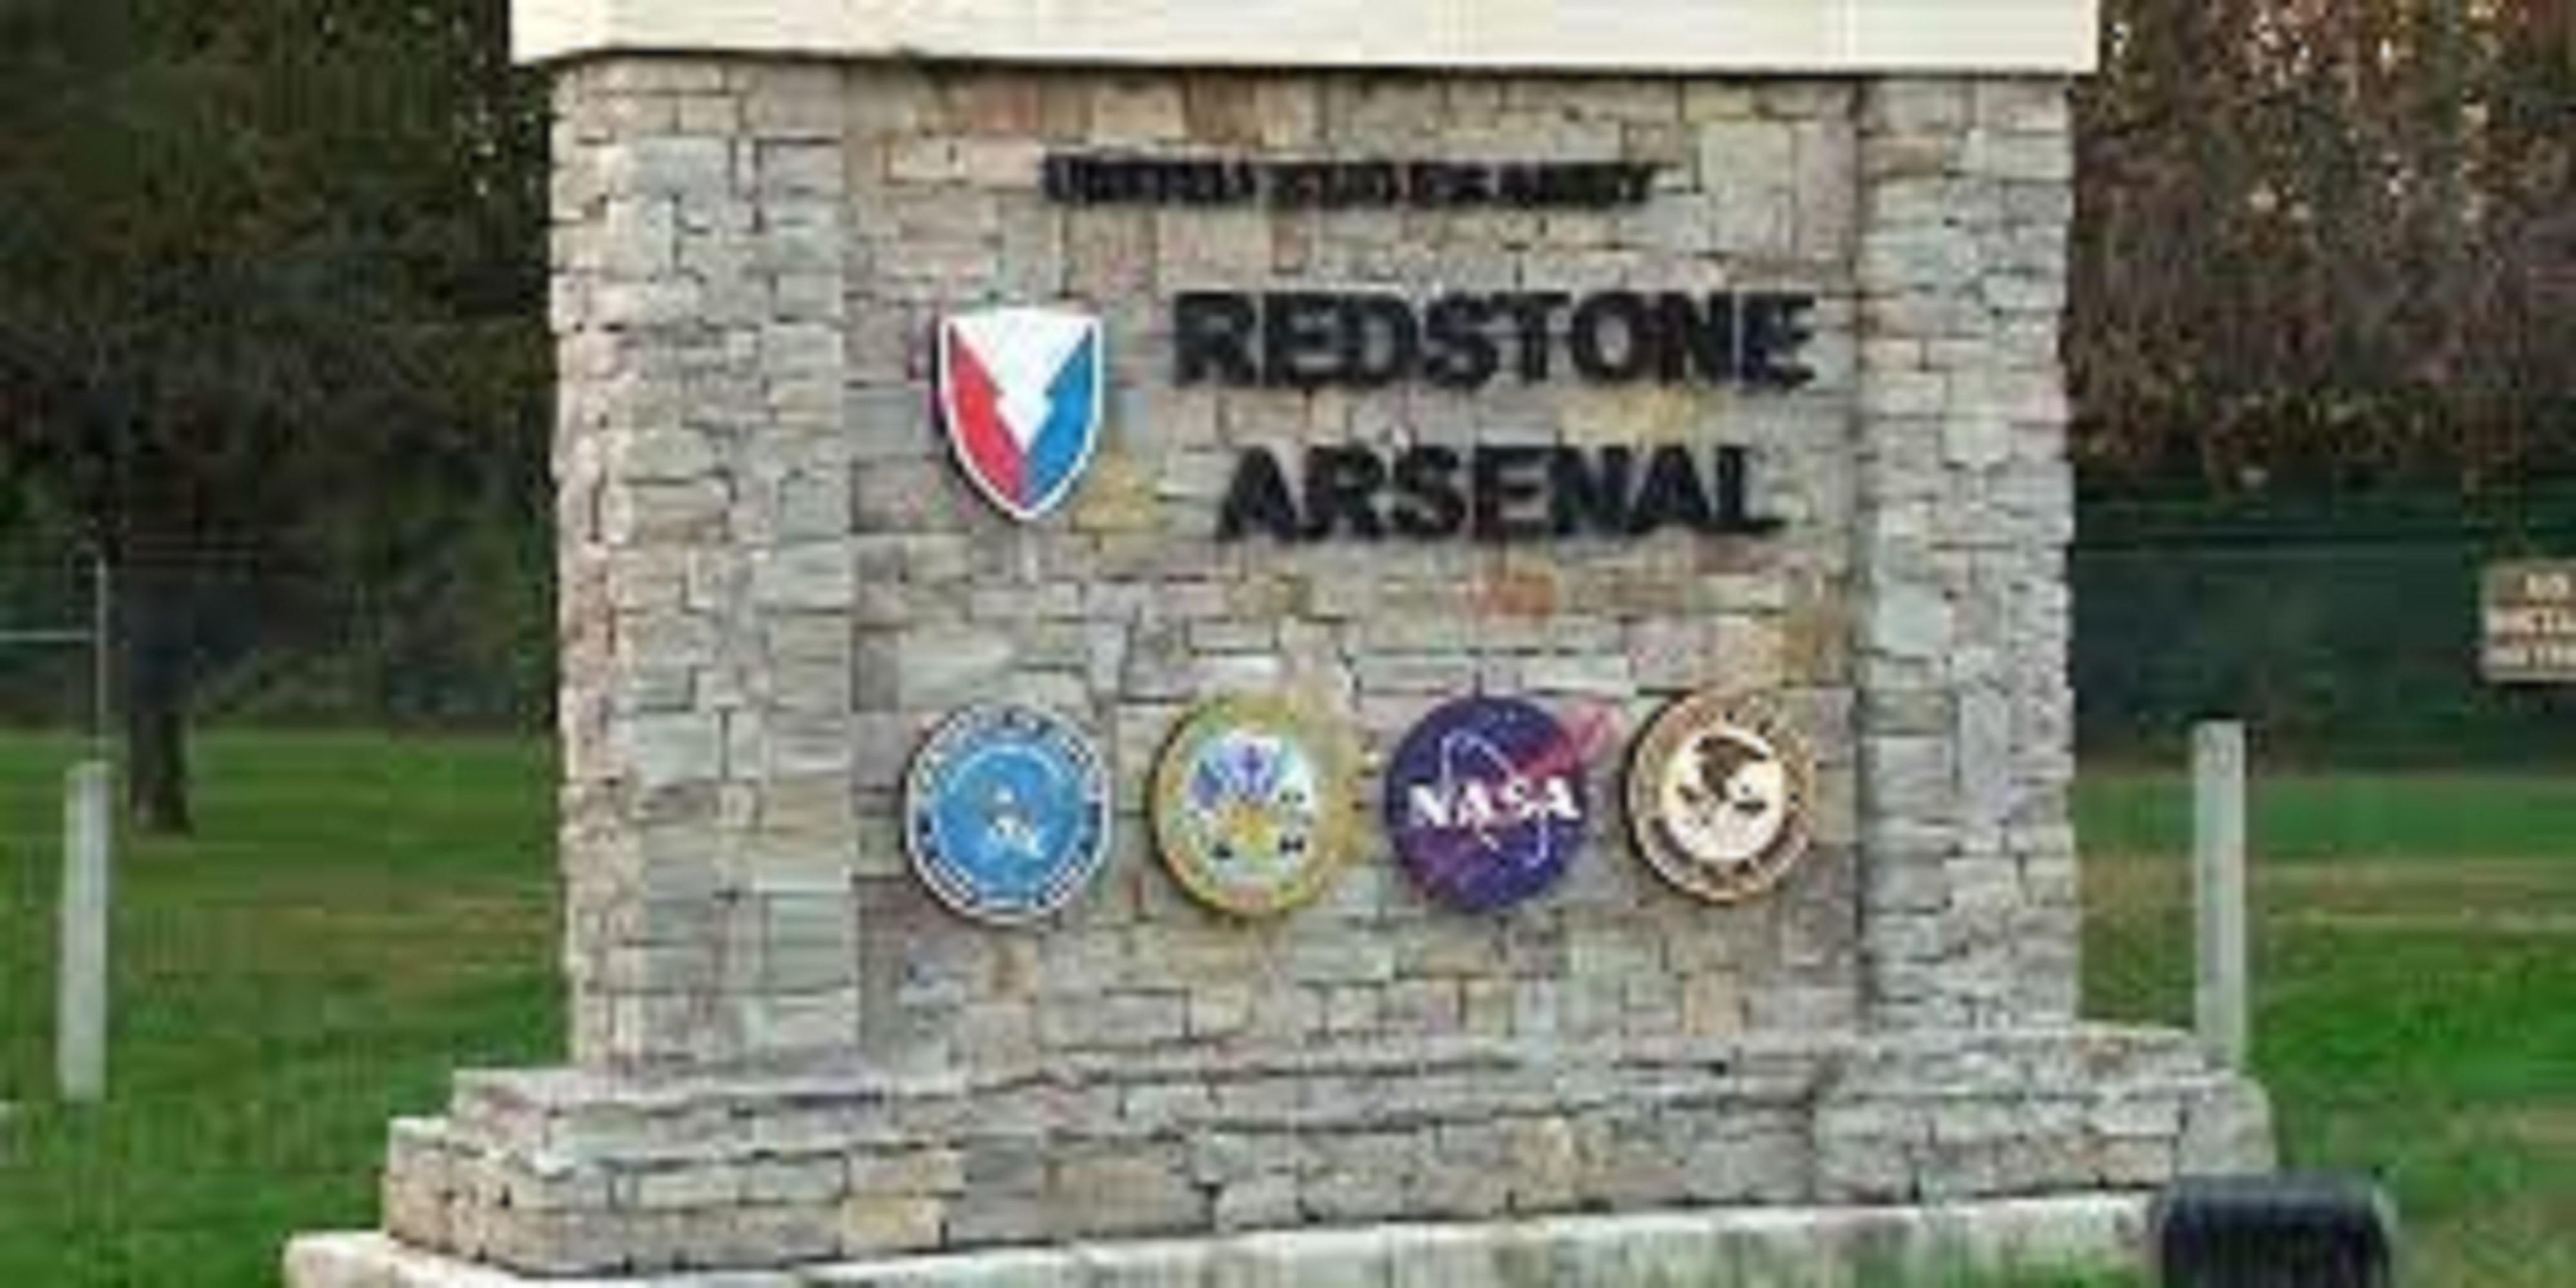 Easy access to Gate 9 Redstone Arsenal.